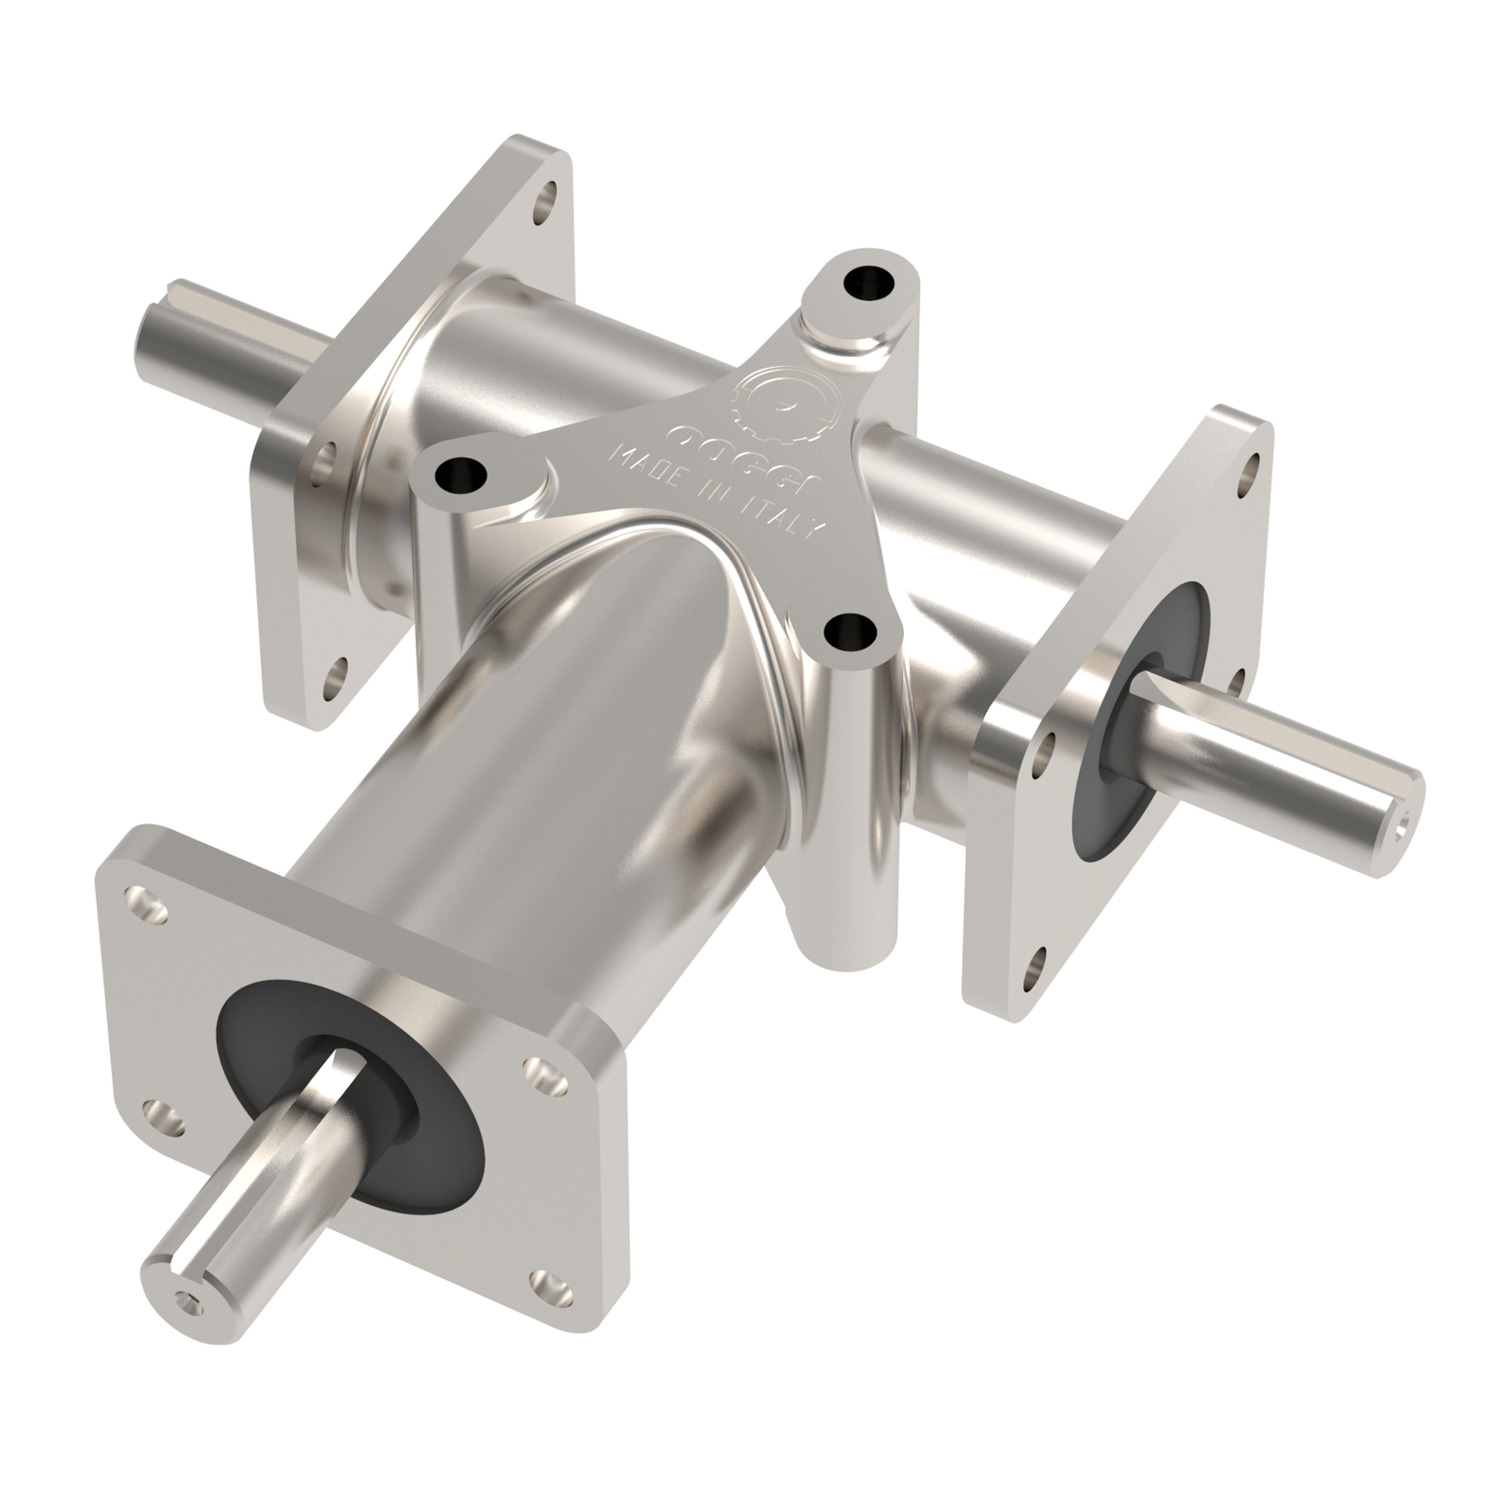 R2355 Stainless Right Angle Drives - 3 shafts